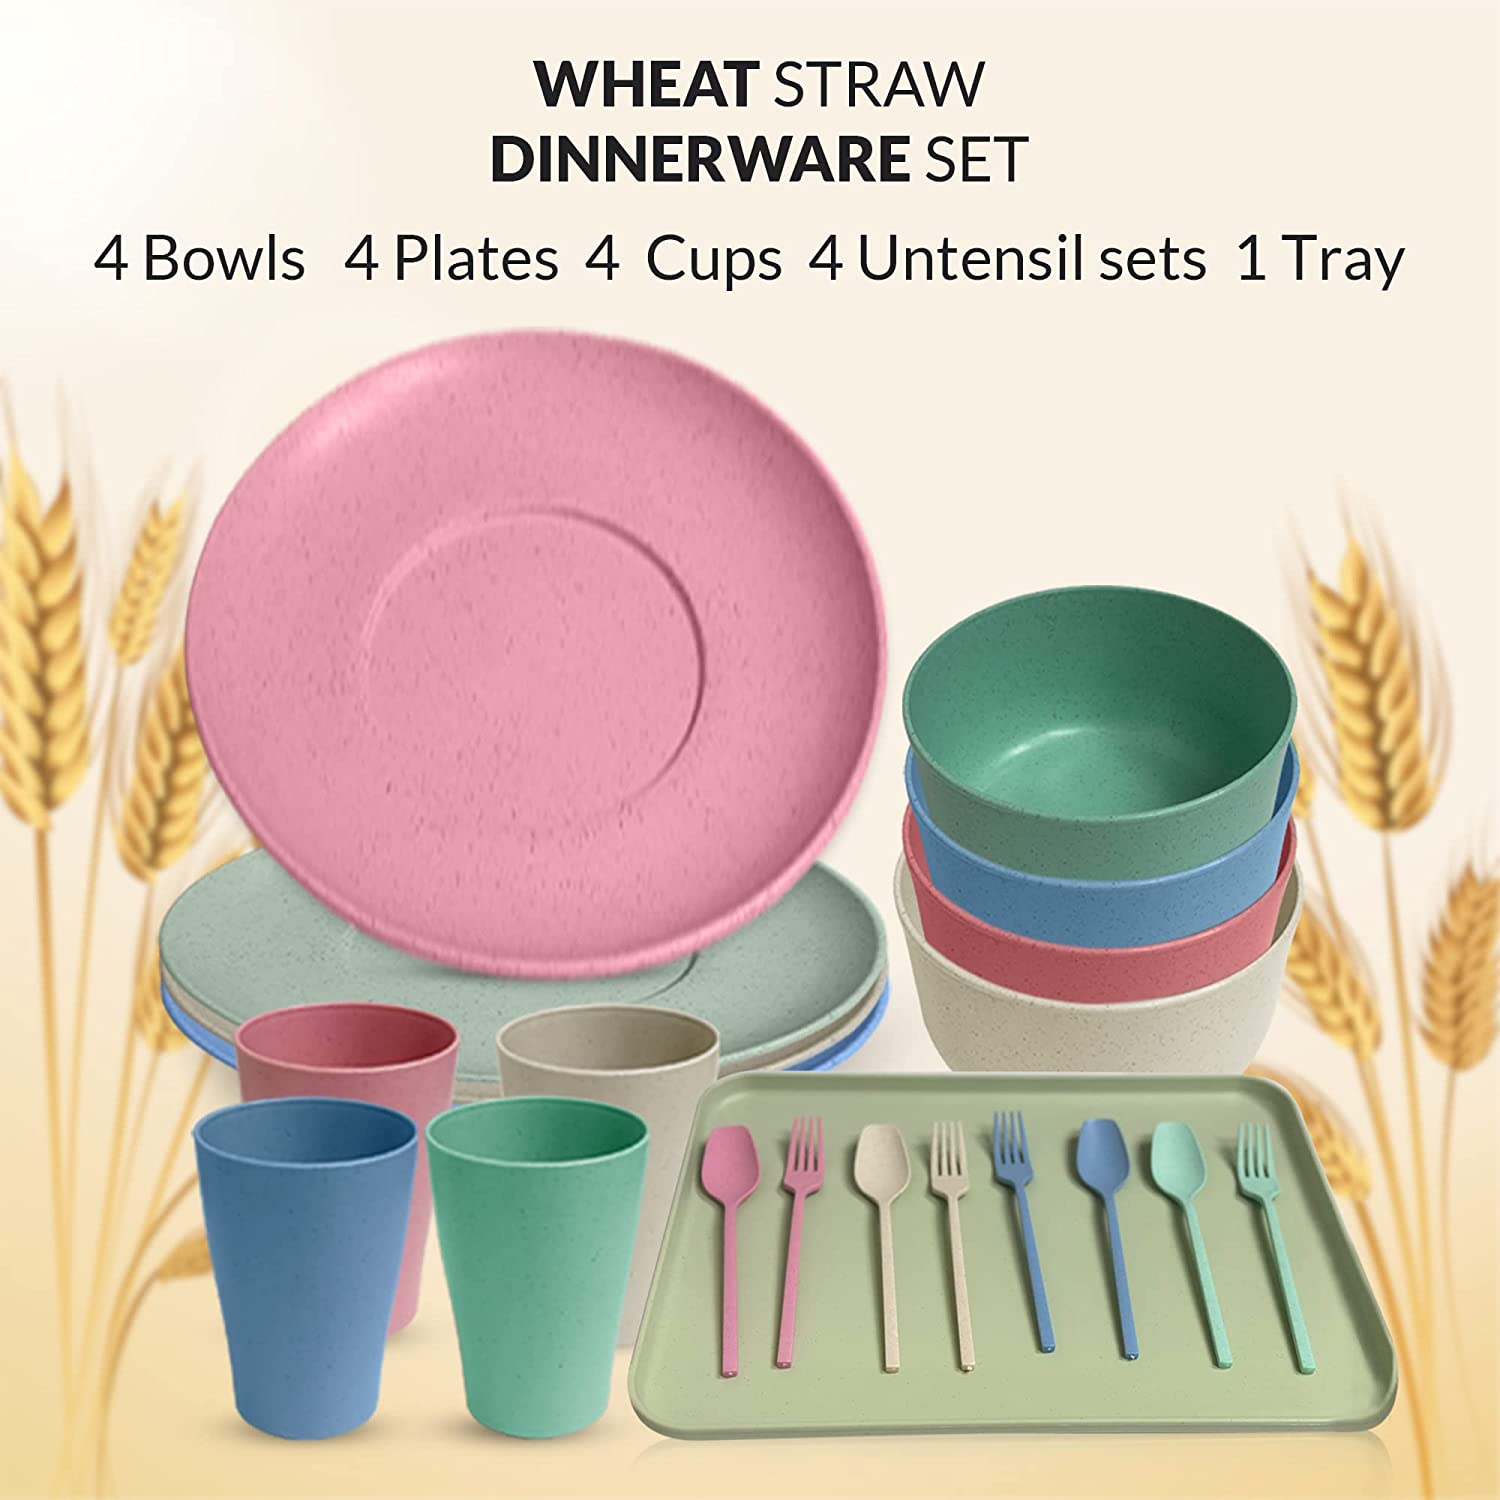 Unbreakable Wheat Straw Plastic Cereal Bowls Set of 4 - BPA Free